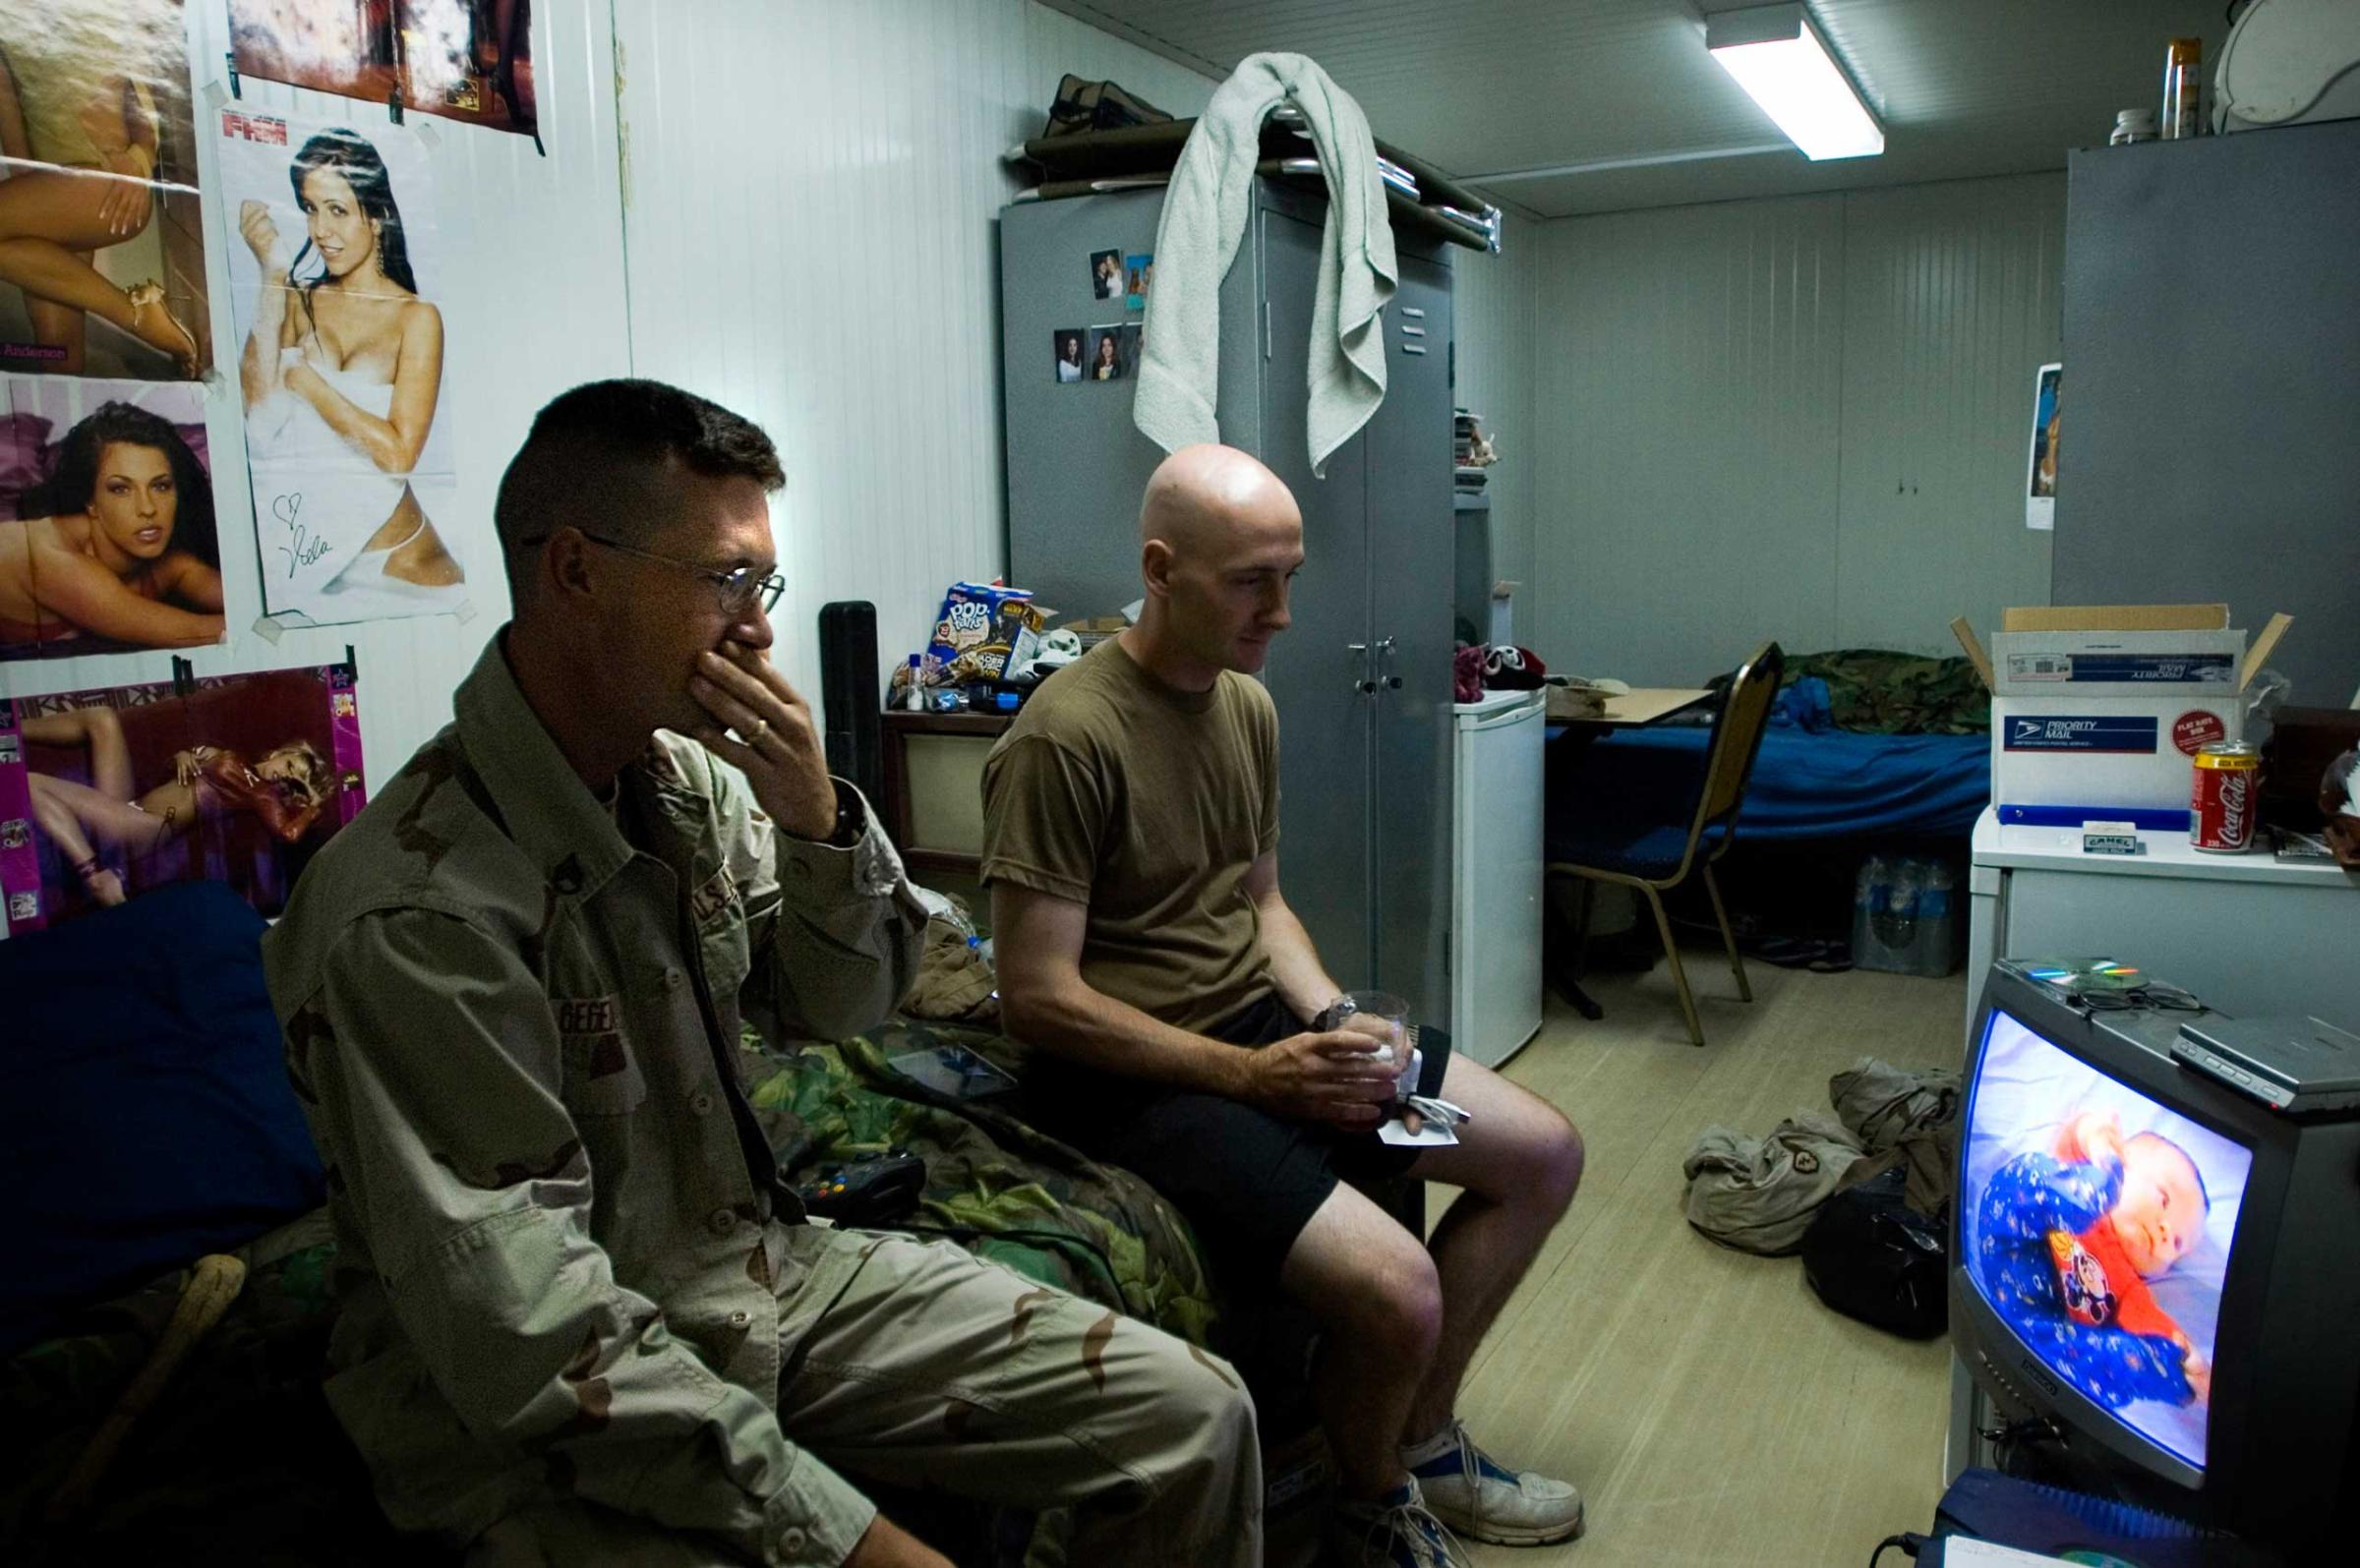 Squad Leader SSG Michael Gegebheimer, left, of Alpha Company 3-21 Stryker Batt. watches a video of his newborn baby in the small trailer that has been his home for a year in Foward Operatin Base Courage in Mosul, Iraq.